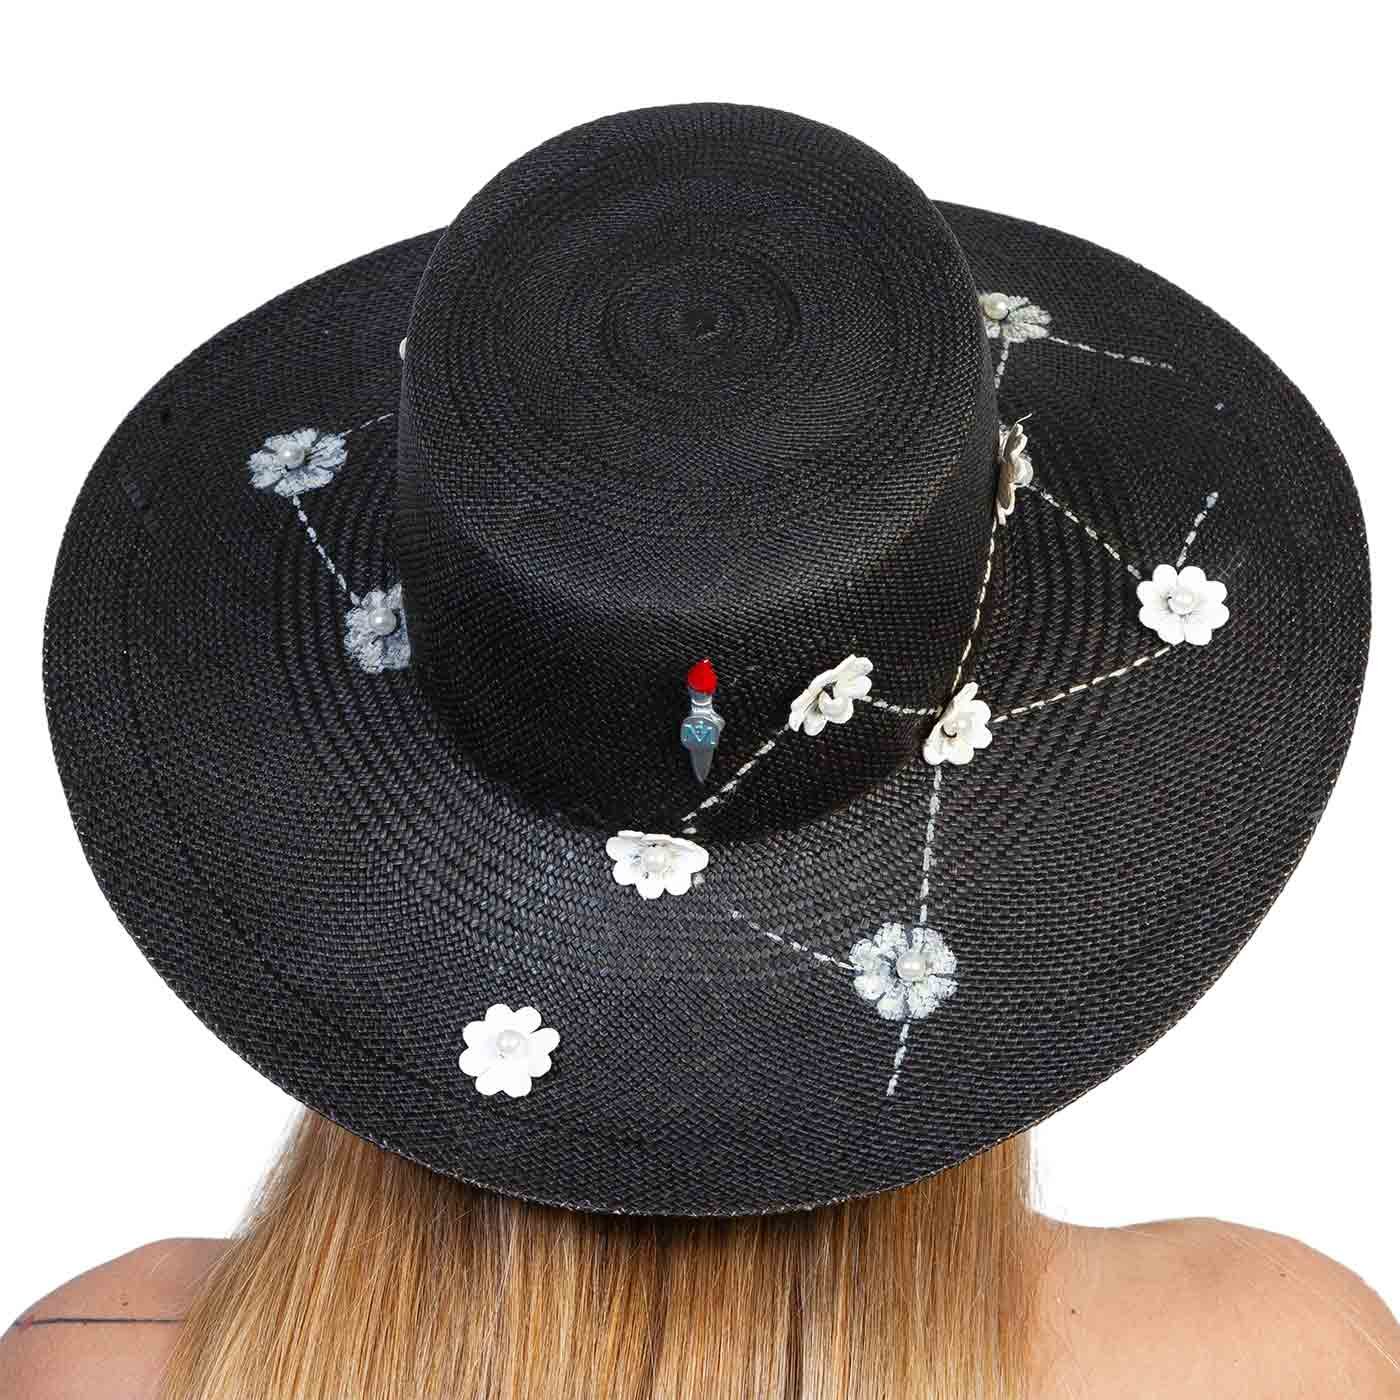 SHADOW DAISIES HAT BACK